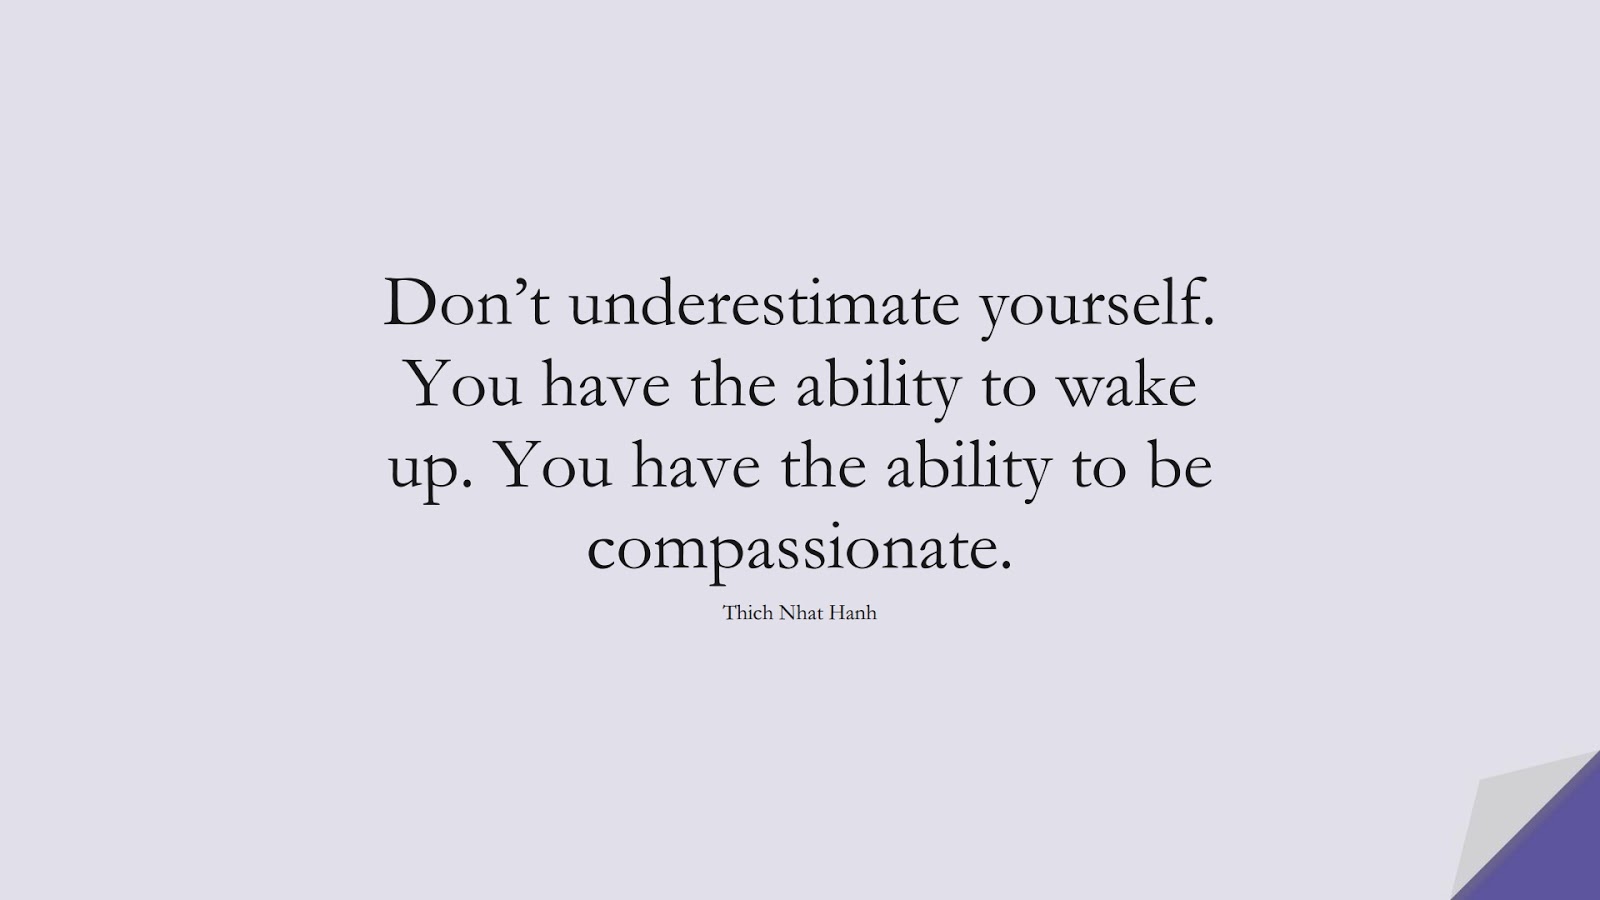 Don’t underestimate yourself. You have the ability to wake up. You have the ability to be compassionate. (Thich Nhat Hanh);  #SelfEsteemQuotes